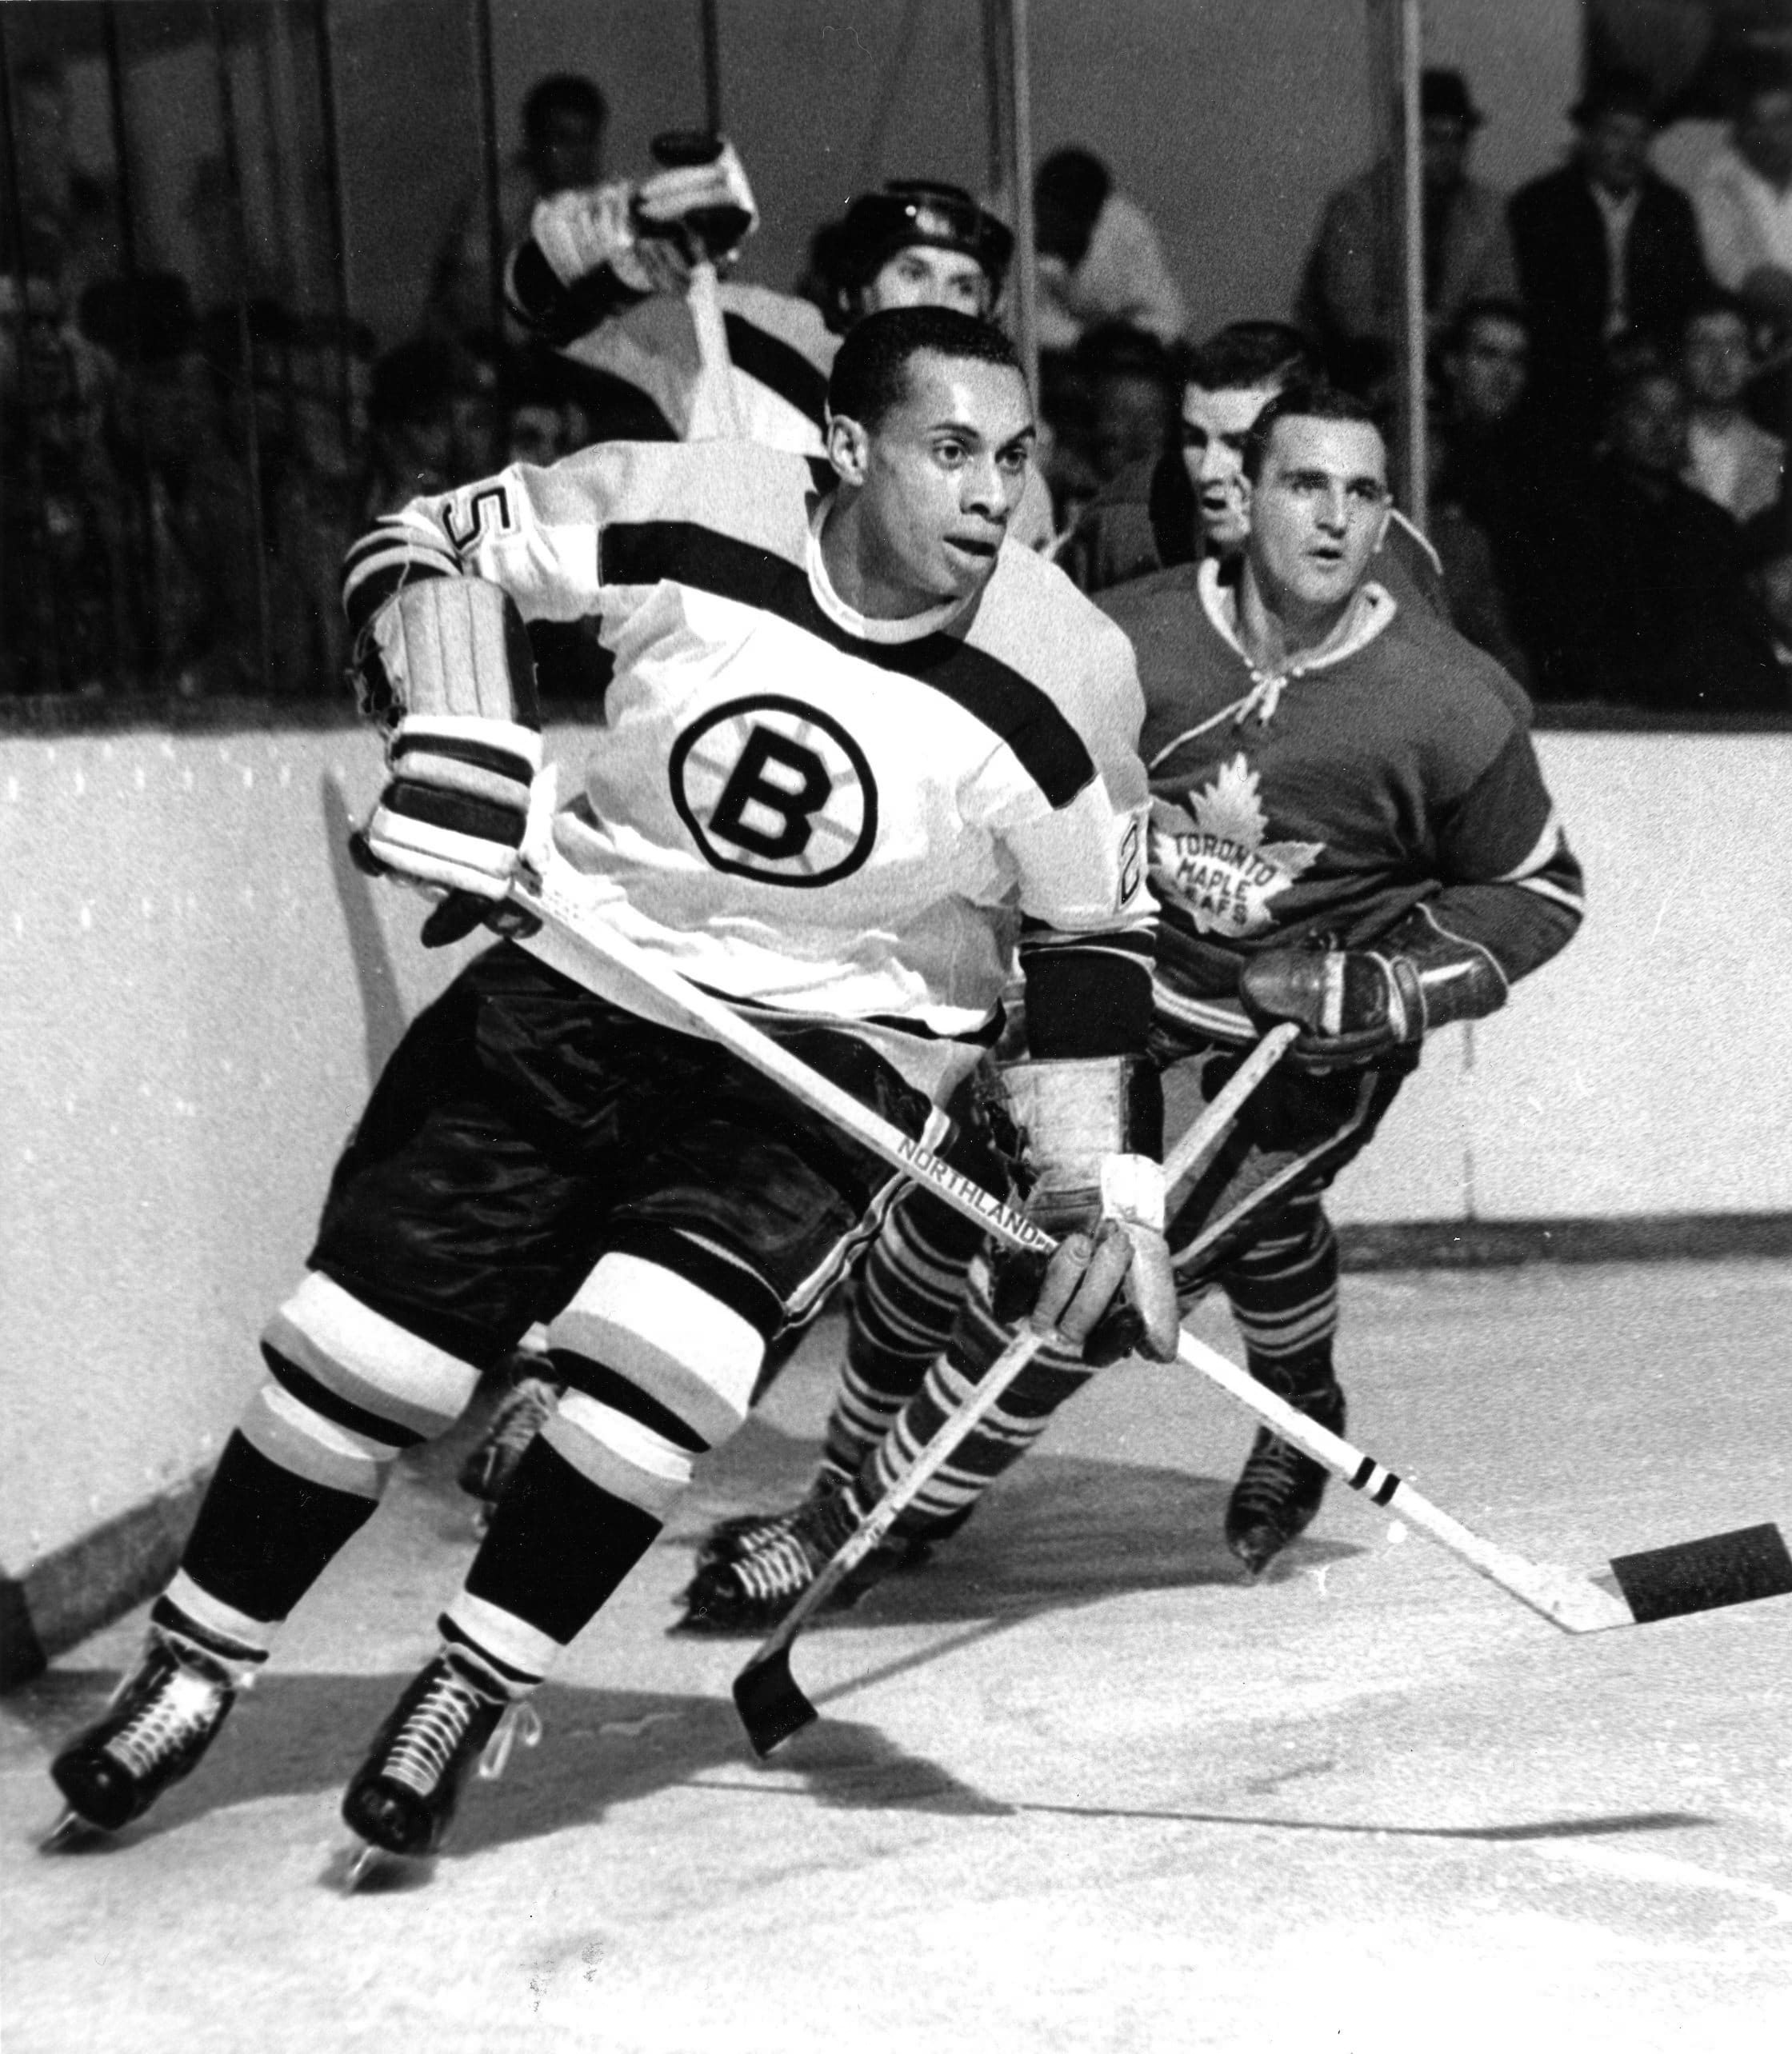 Congressional gold medal sought for NHL player O'Ree